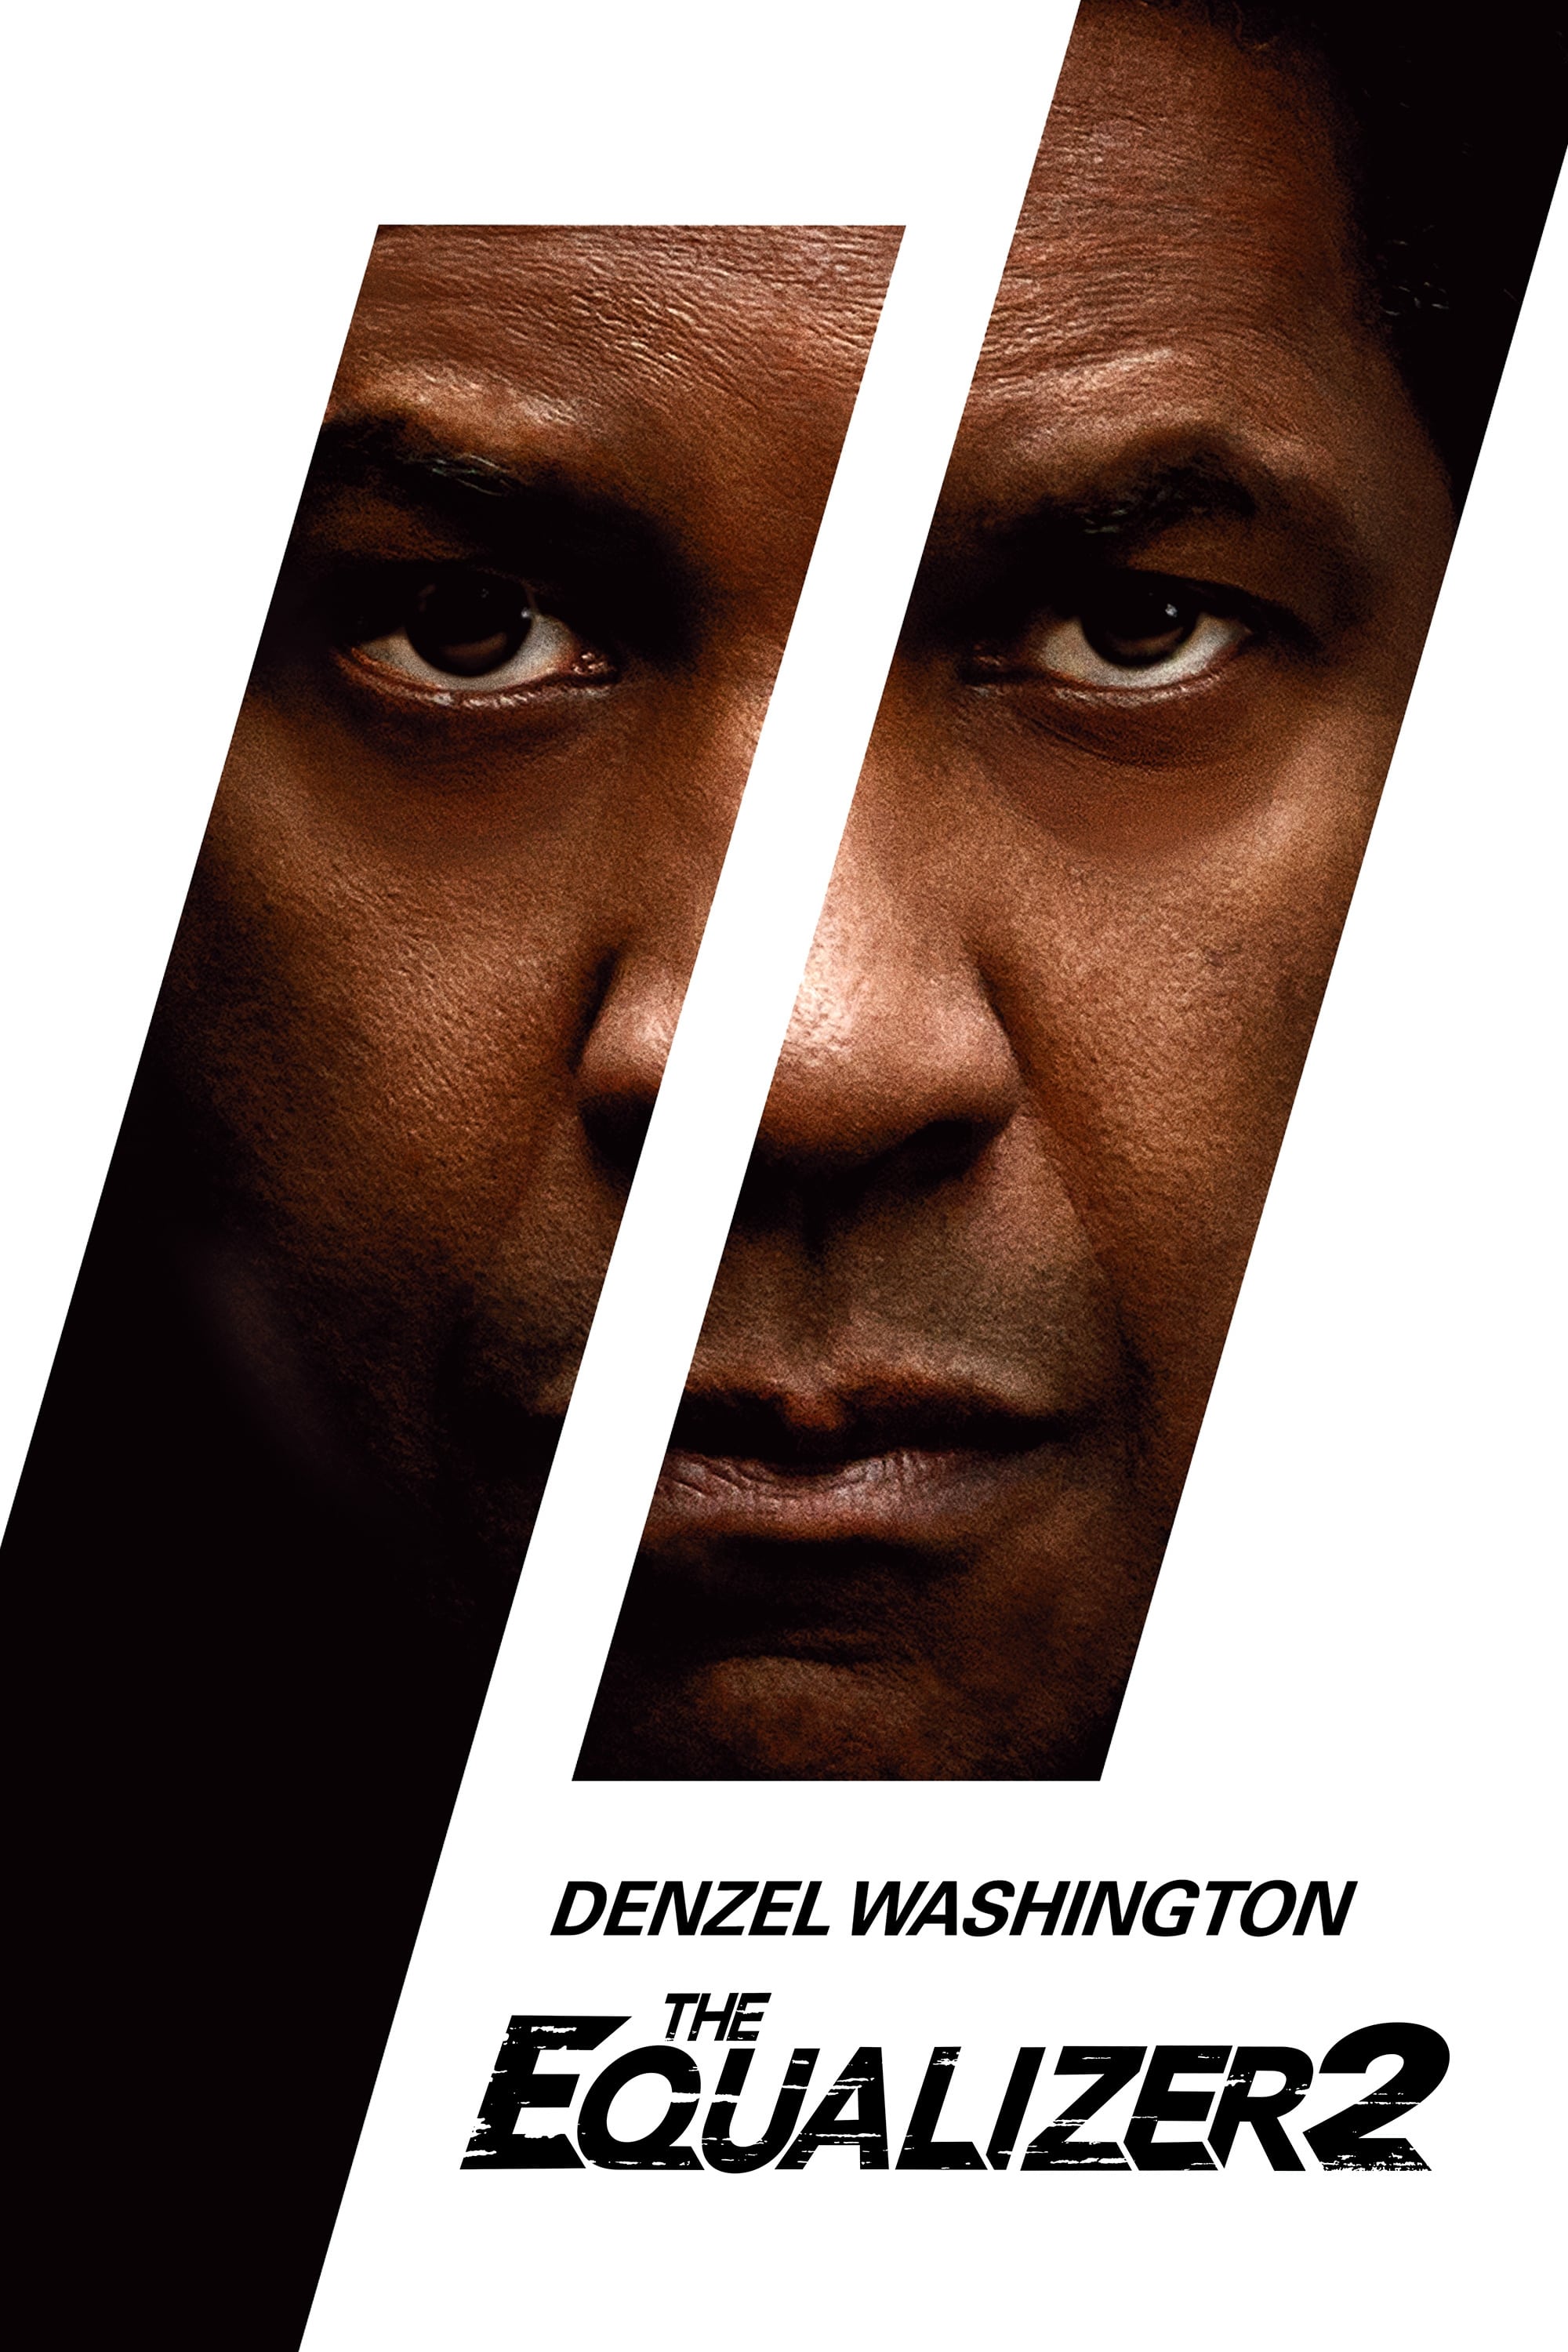 The Equalizer 2 Movie poster